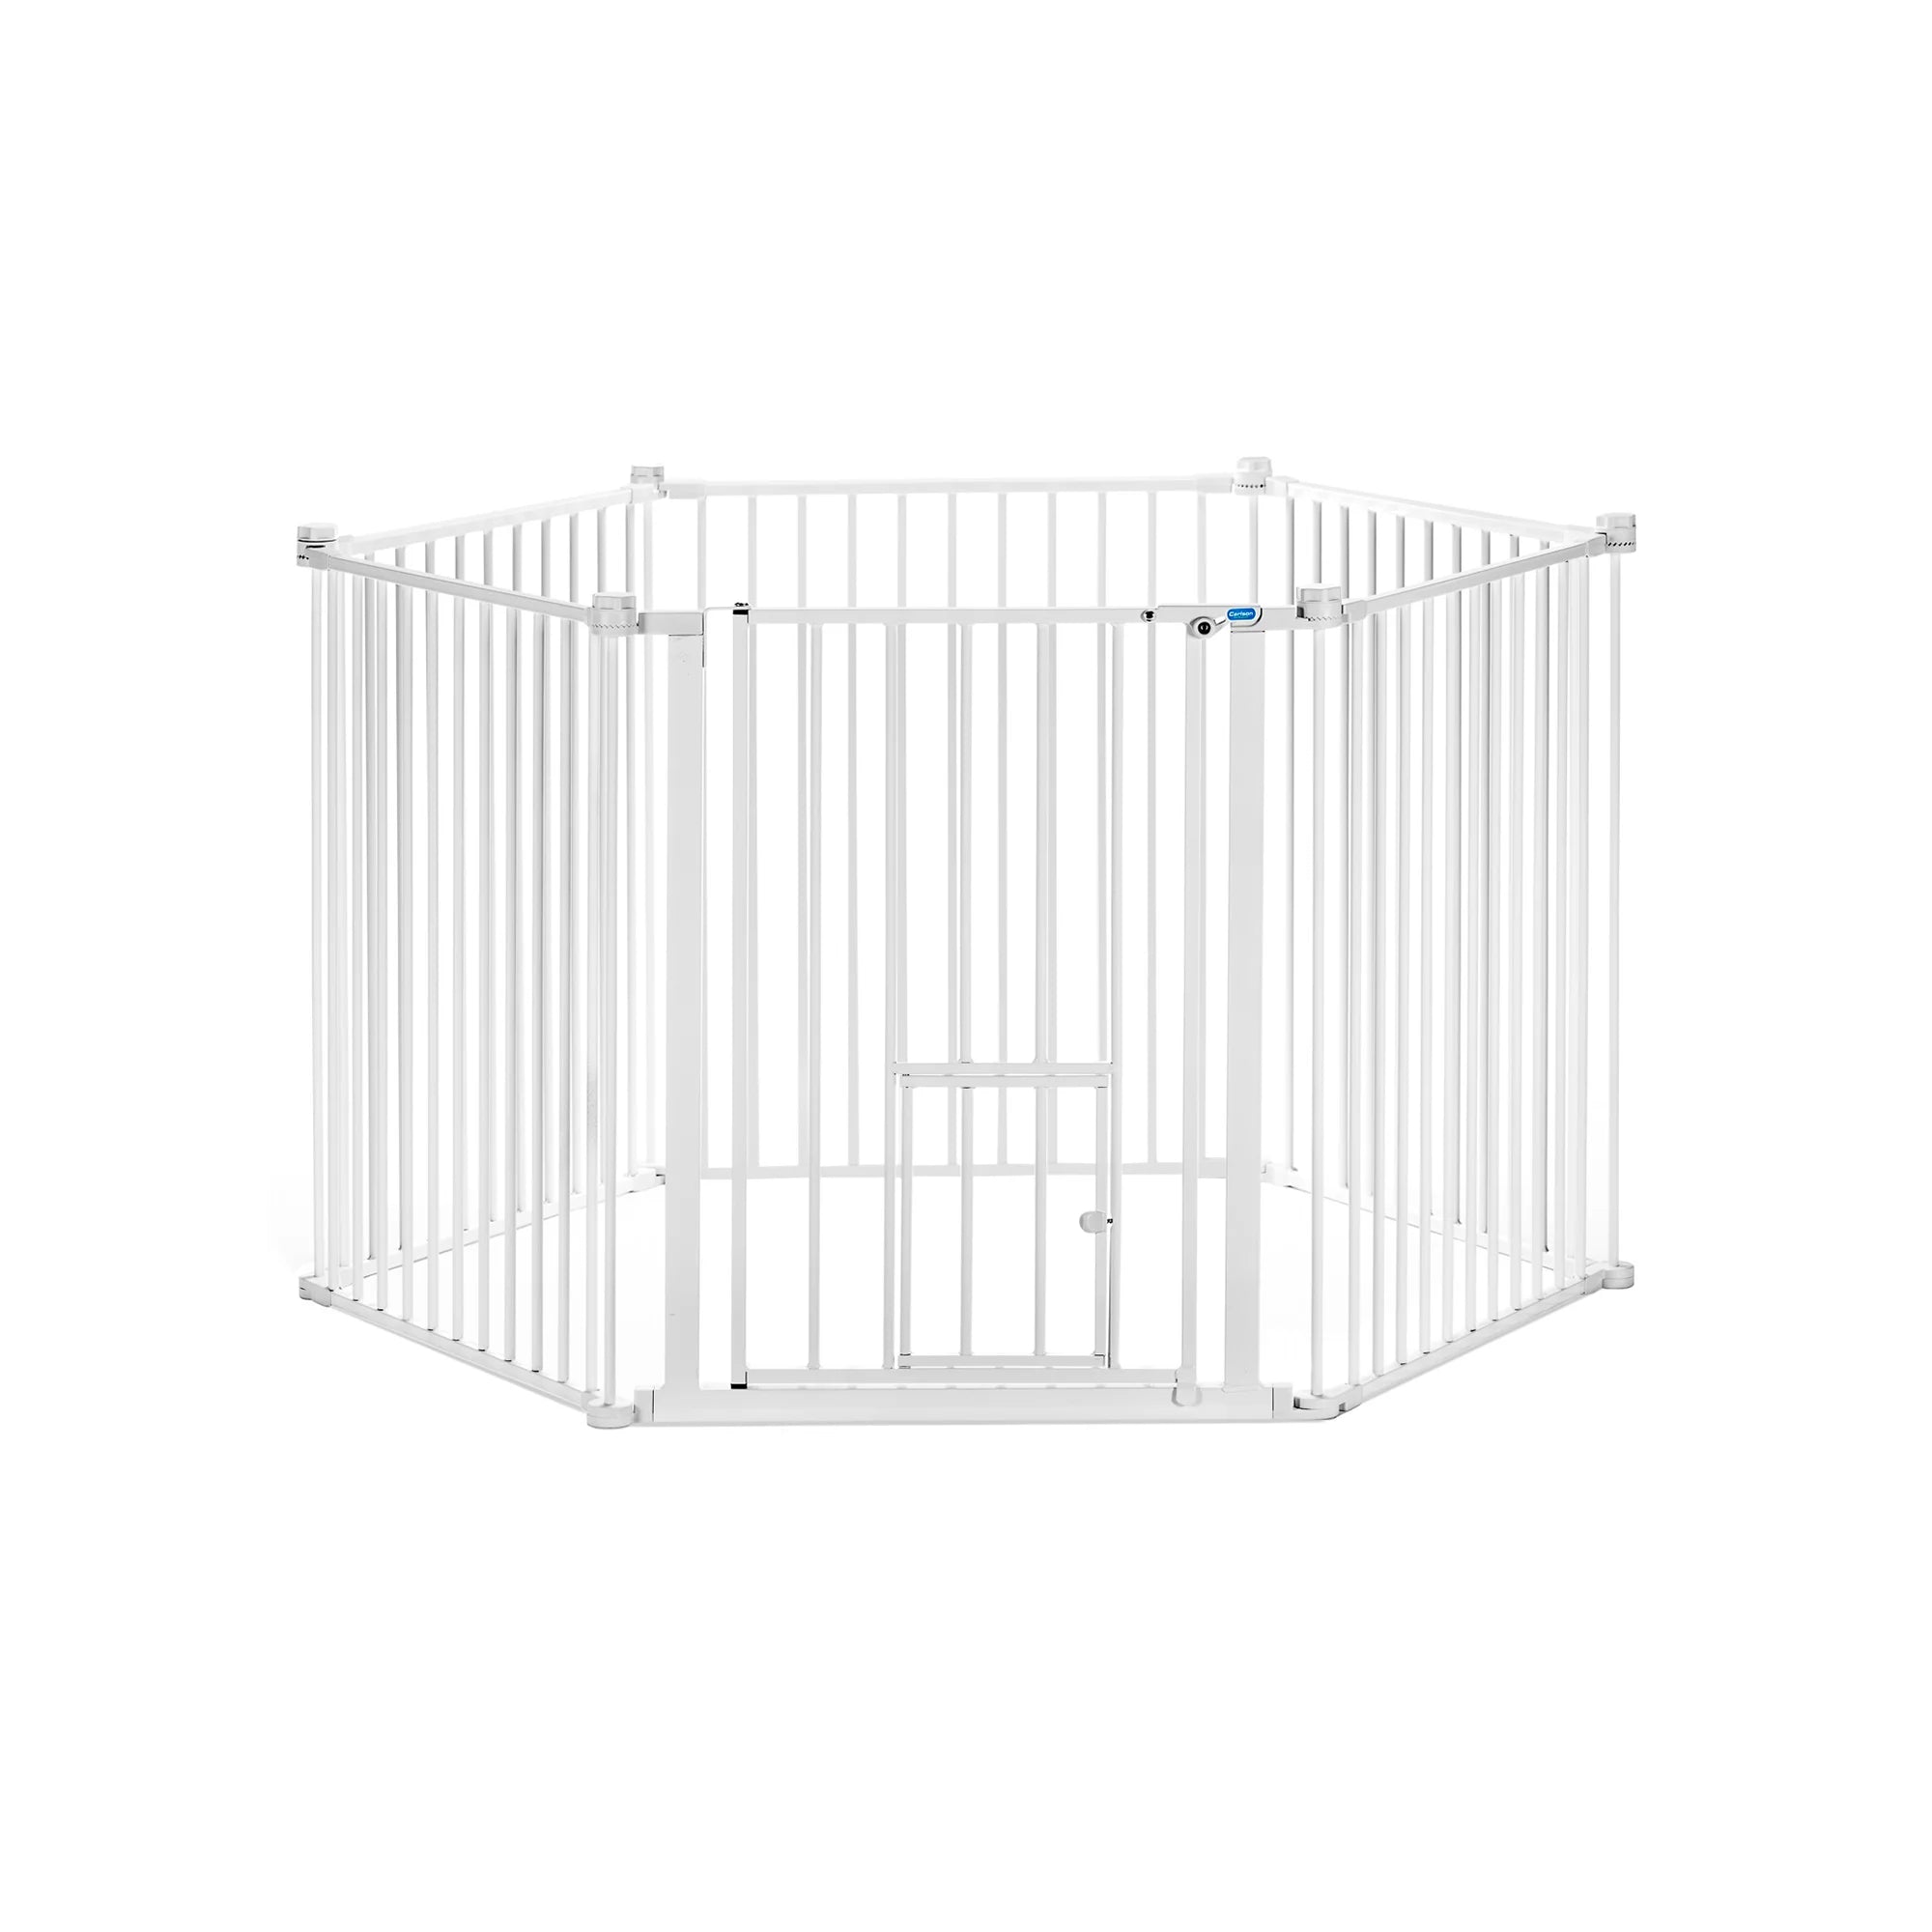 2-in-1 Super Wide Pet Pen & Gate on white background.